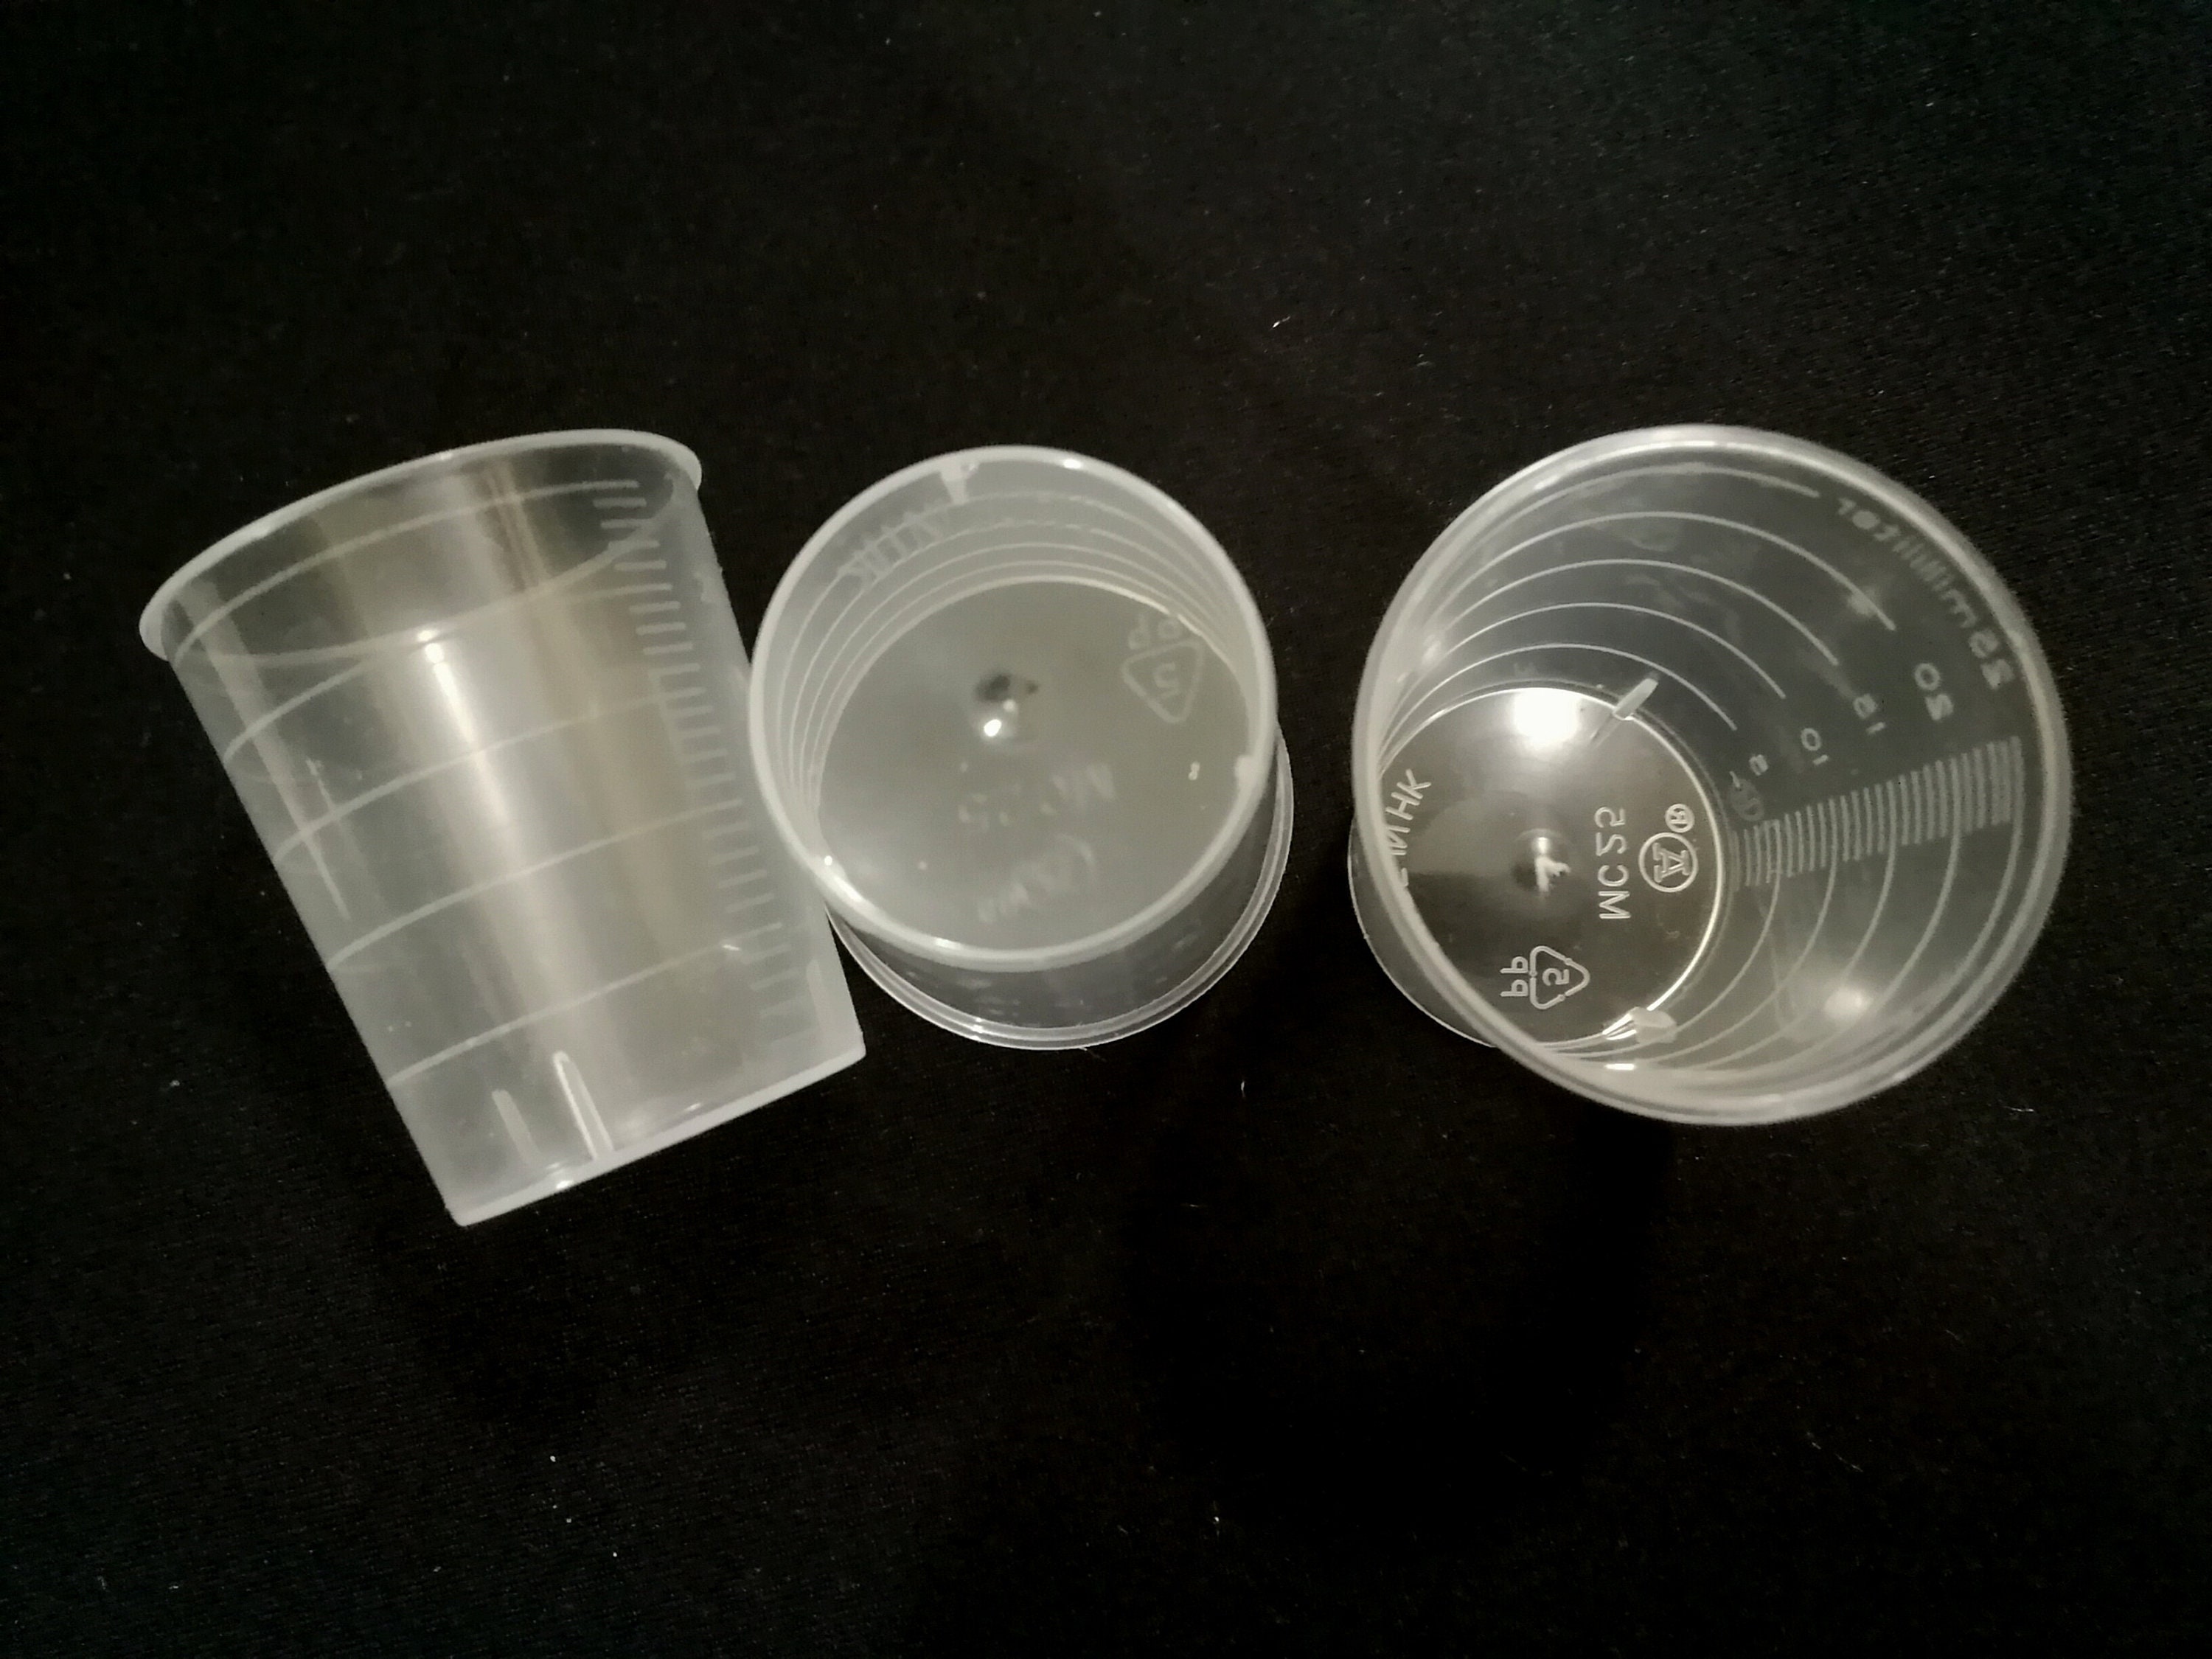 Clear 9 oz PET Plastic Cup - Pak-Man Packaging Supply